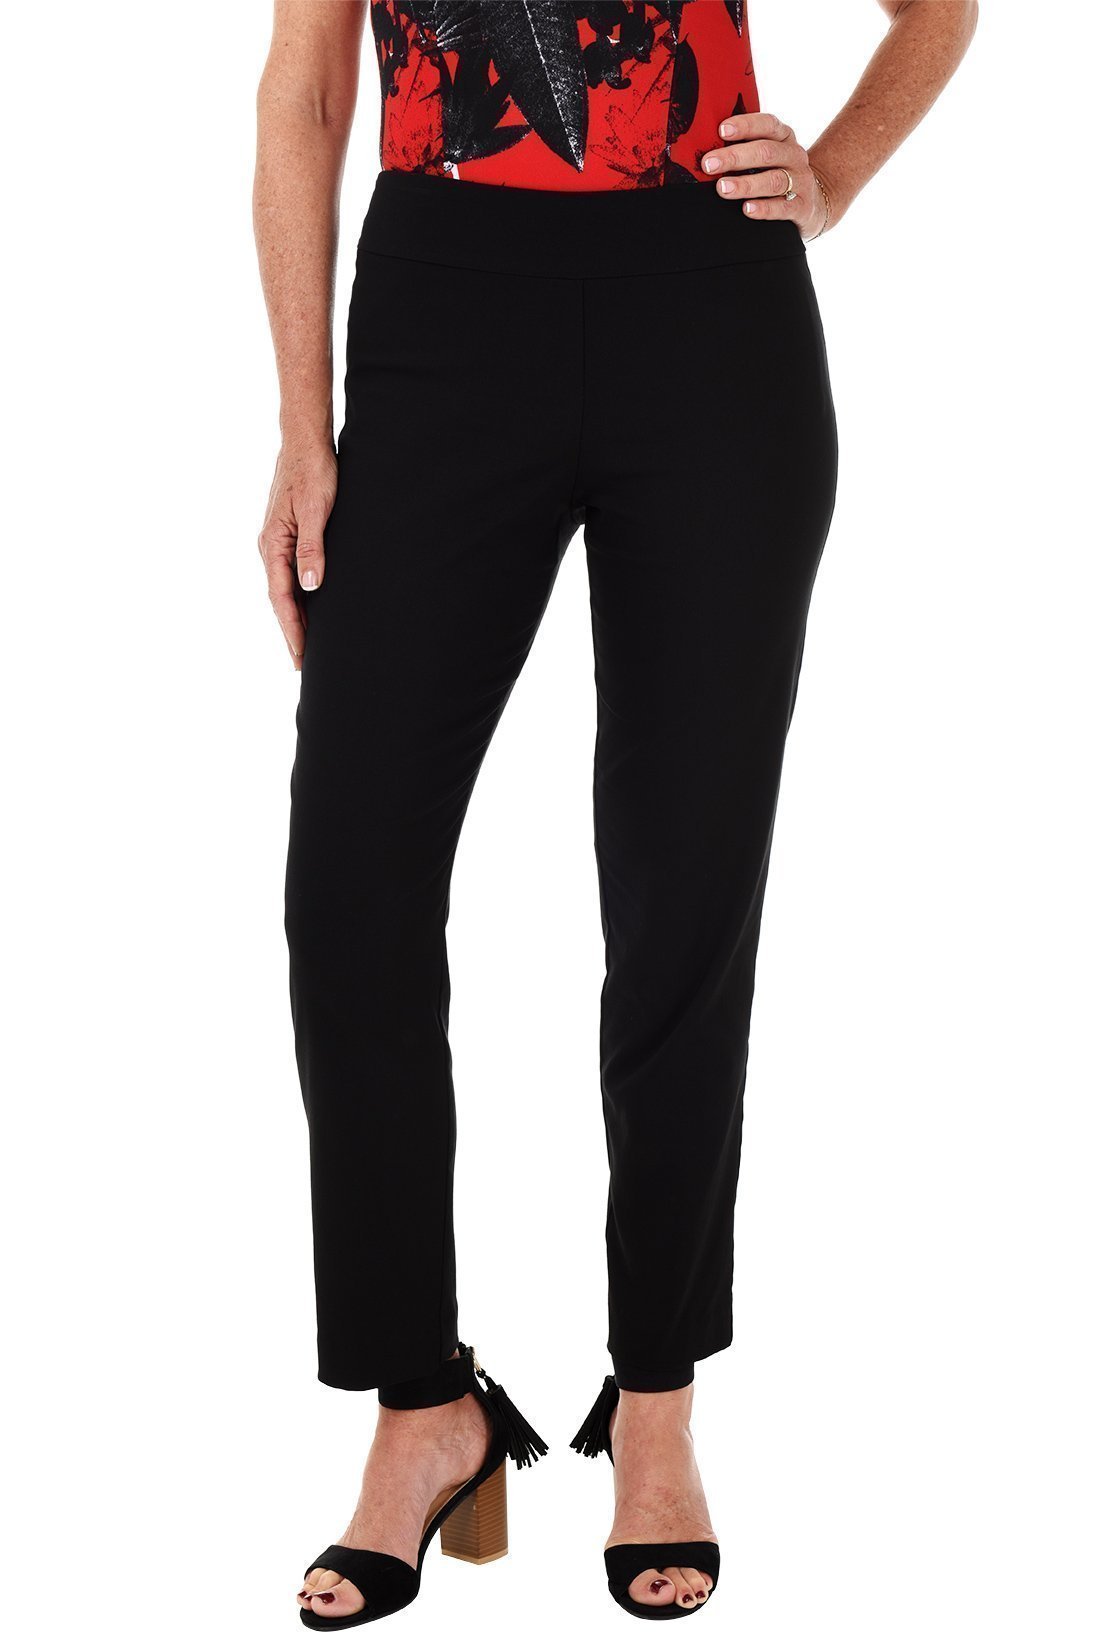 http://www.anthonysfla.com/cdn/shop/products/Kristin-Crenshaw_pant_black_P507_235709_E-0046_2a90f139-23b8-4768-a1ae-85f0992f4743.jpg?v=1619100590